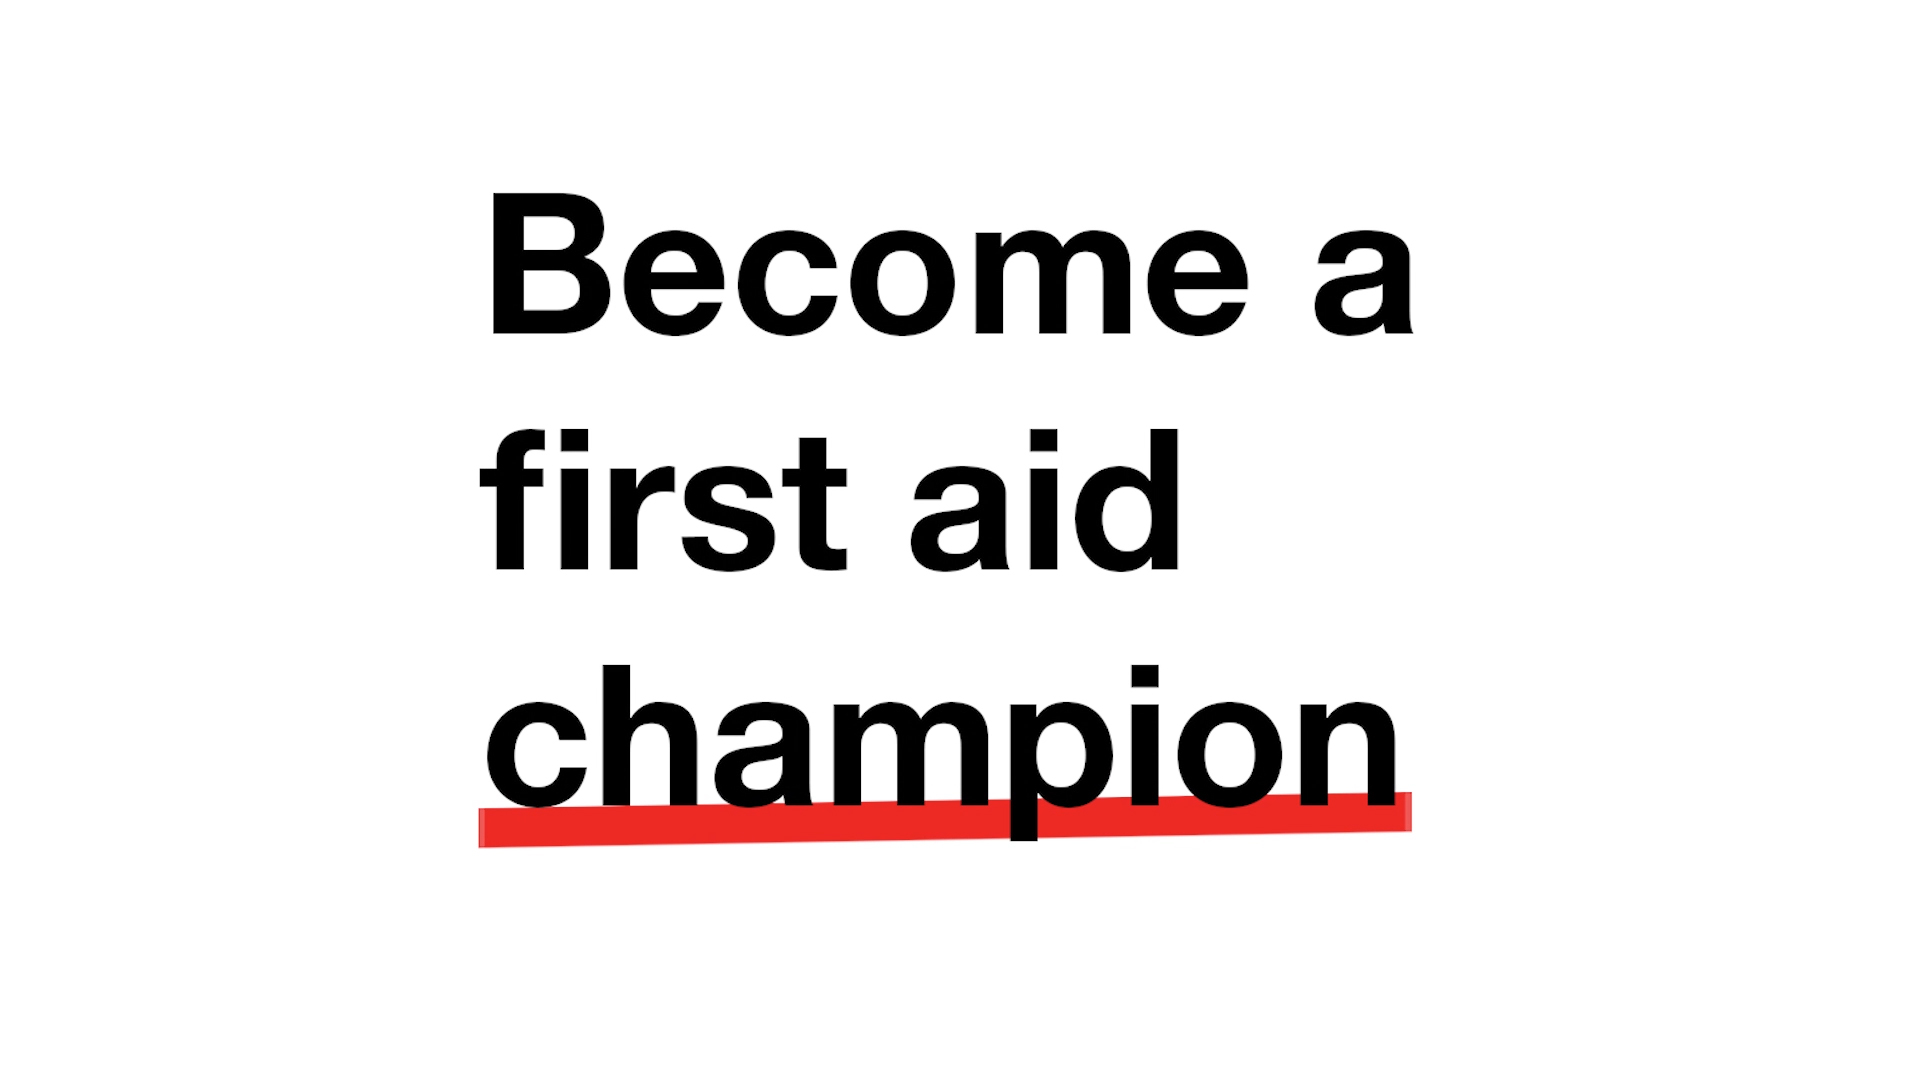 Become a first aid champion